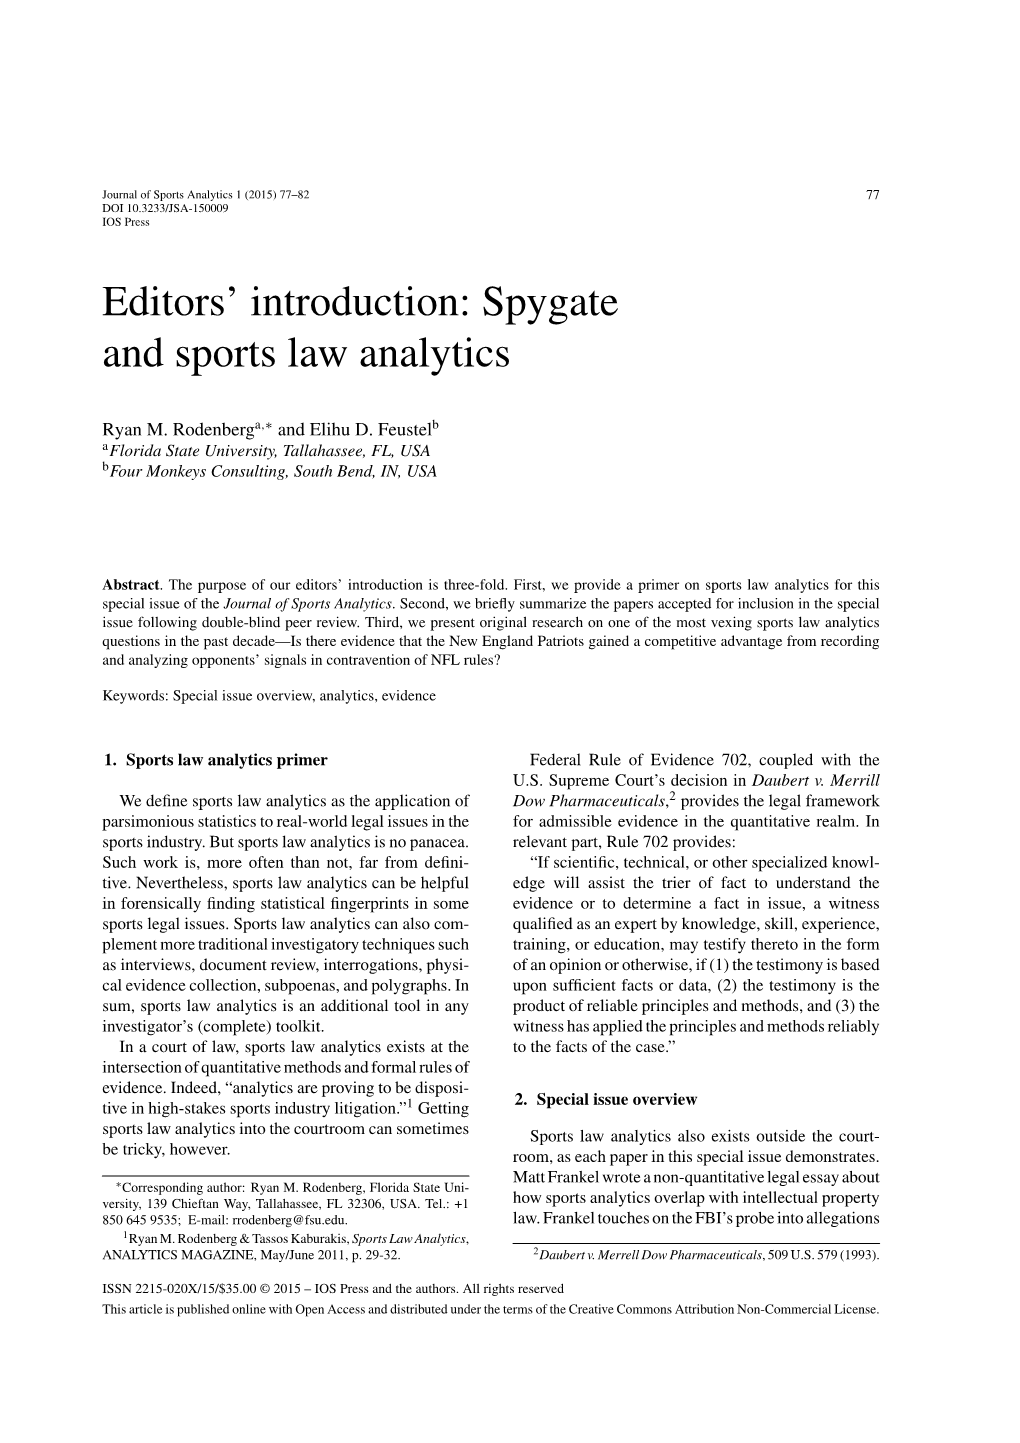 Spygate and Sports Law Analytics